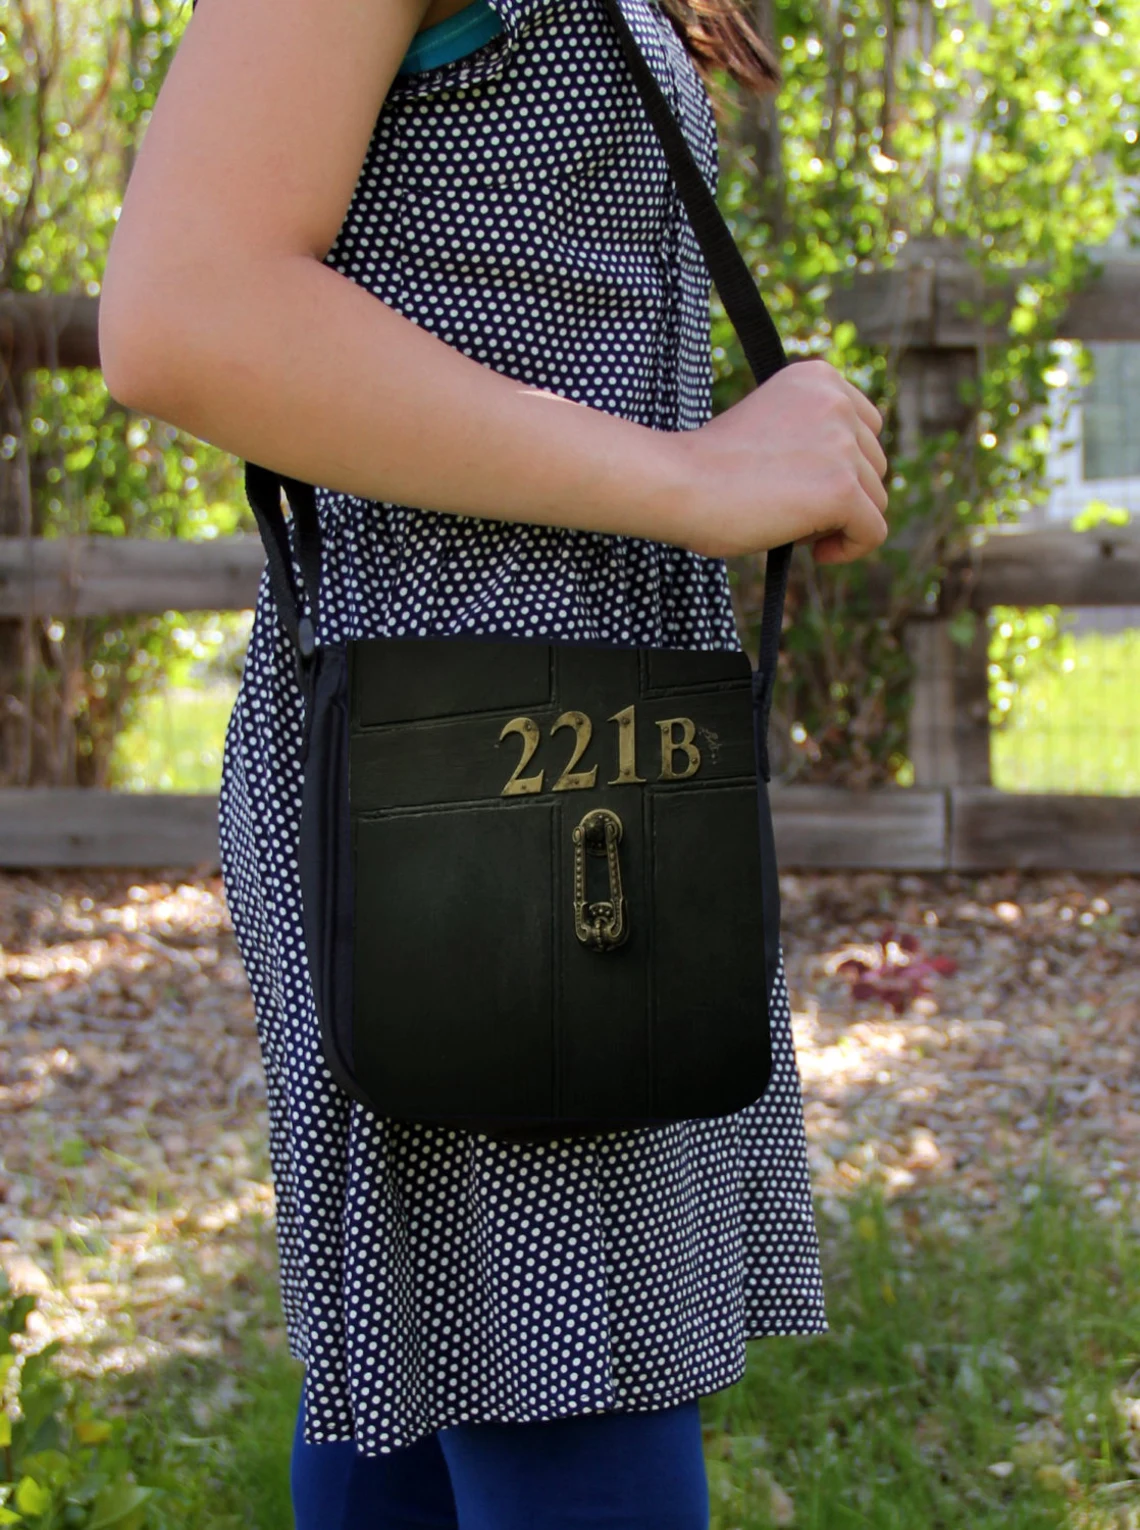 photo of a person in a polka-dot dress wearing a black messenger bag styled like a door with the 221 B door number on it 